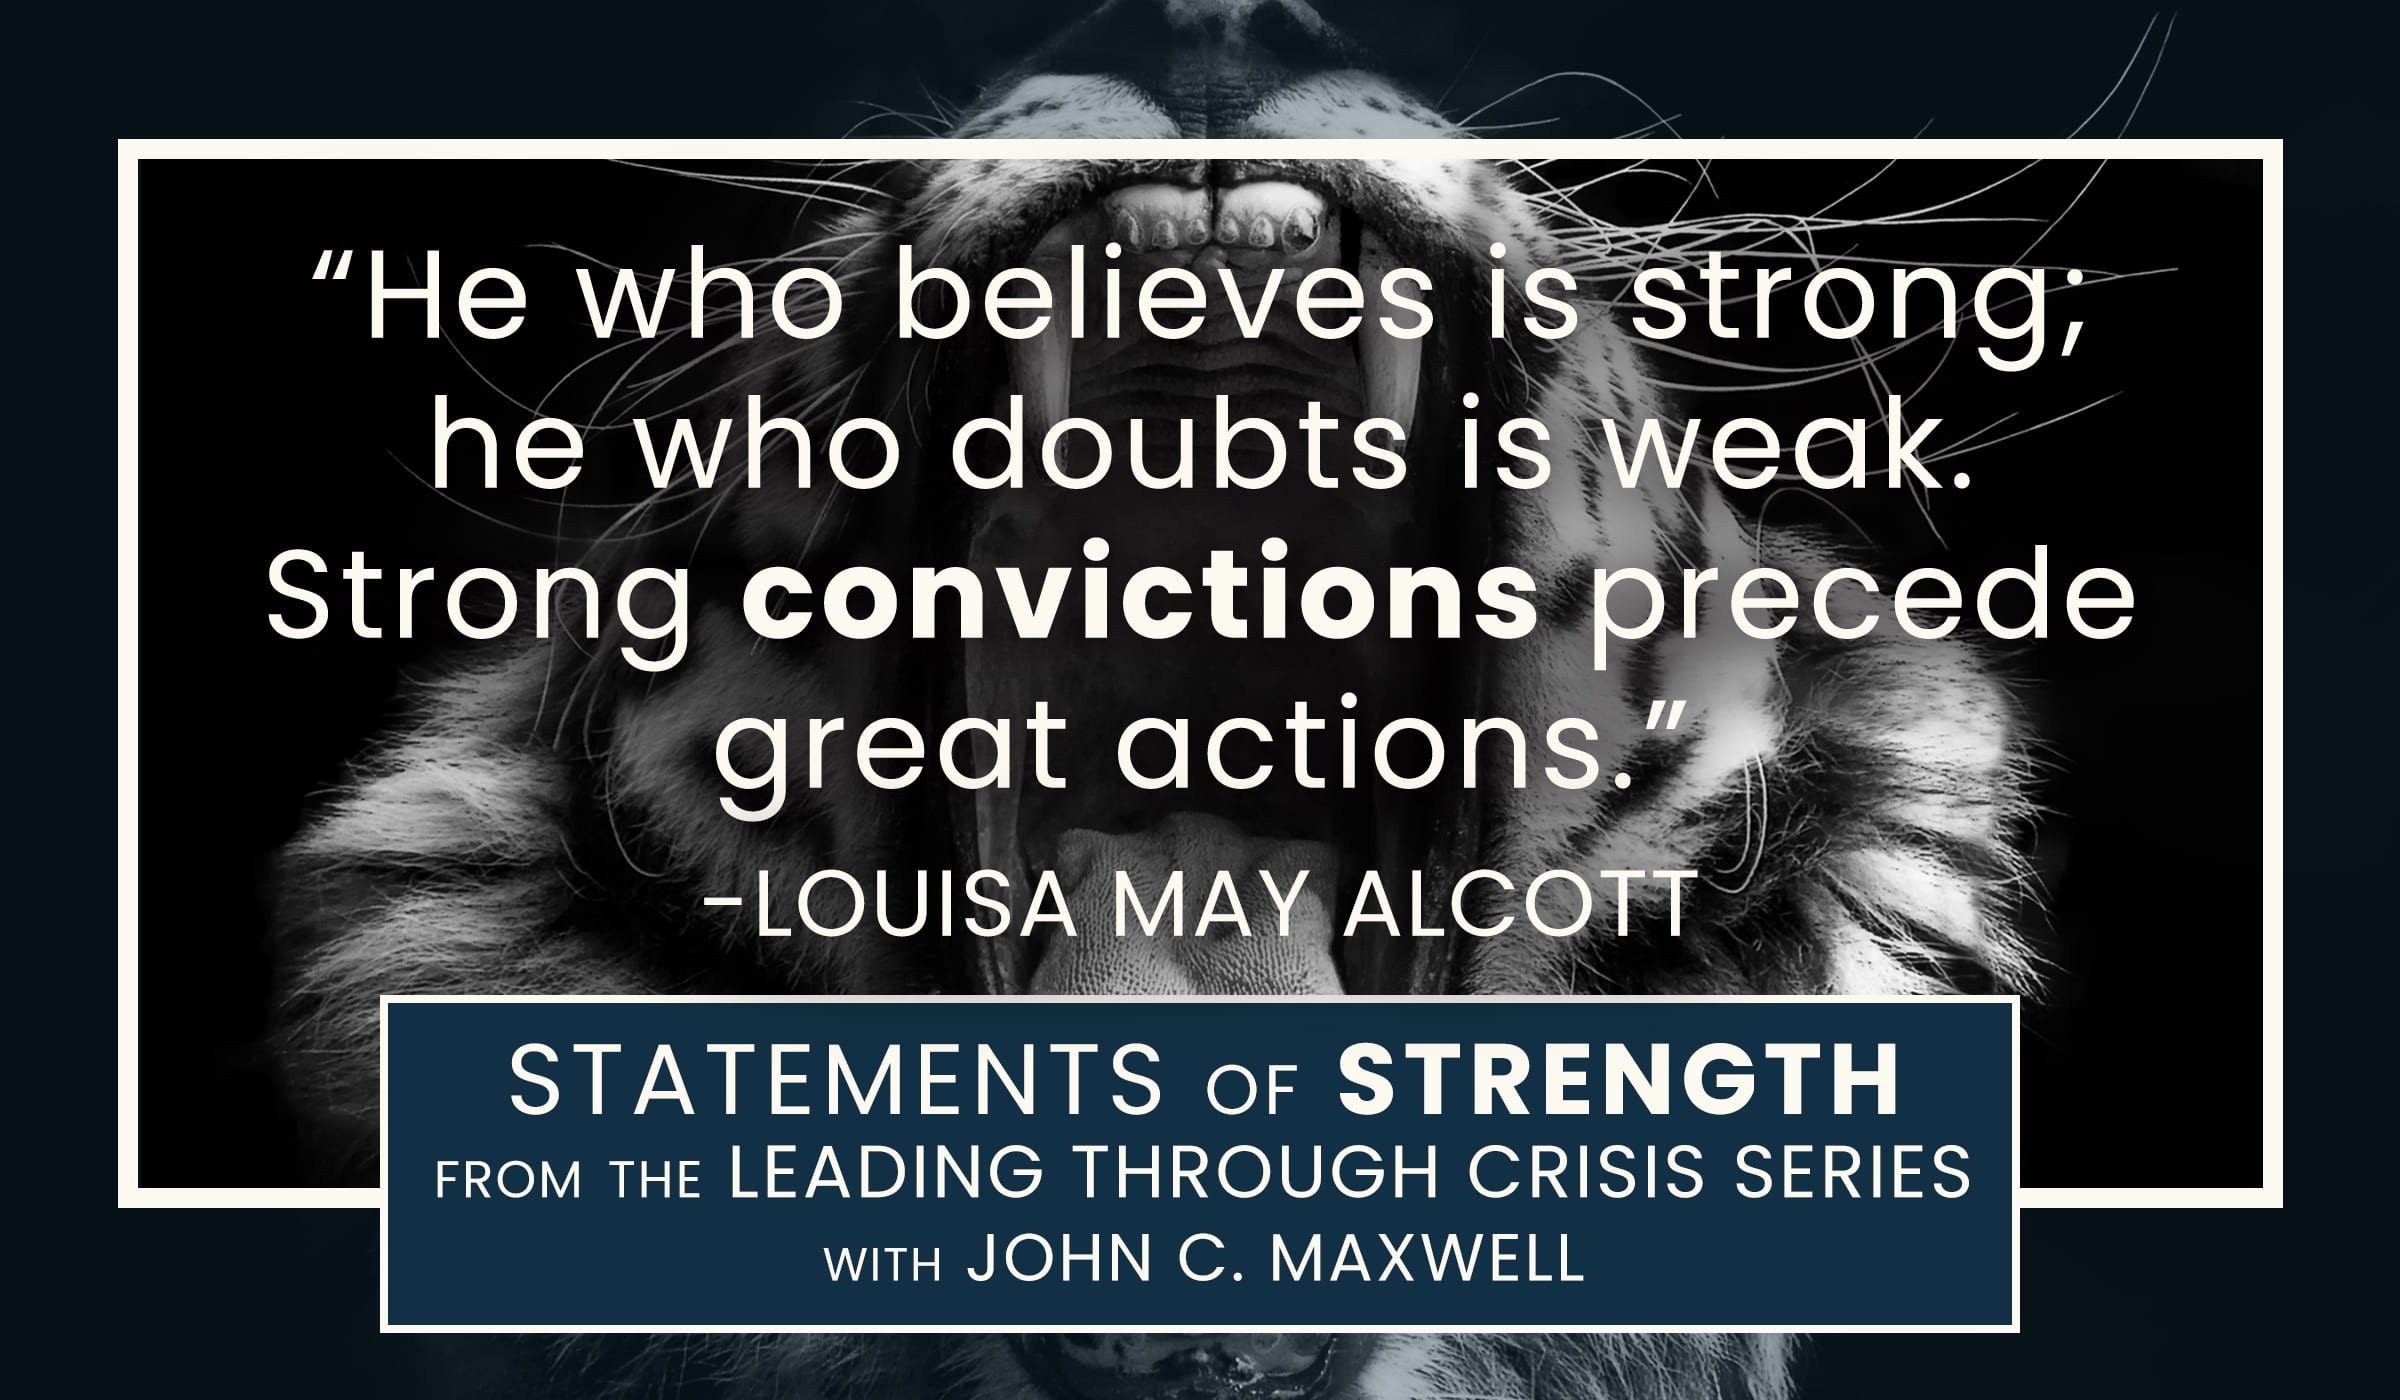 image of quote pic with text quotation by Louisa may Alcott